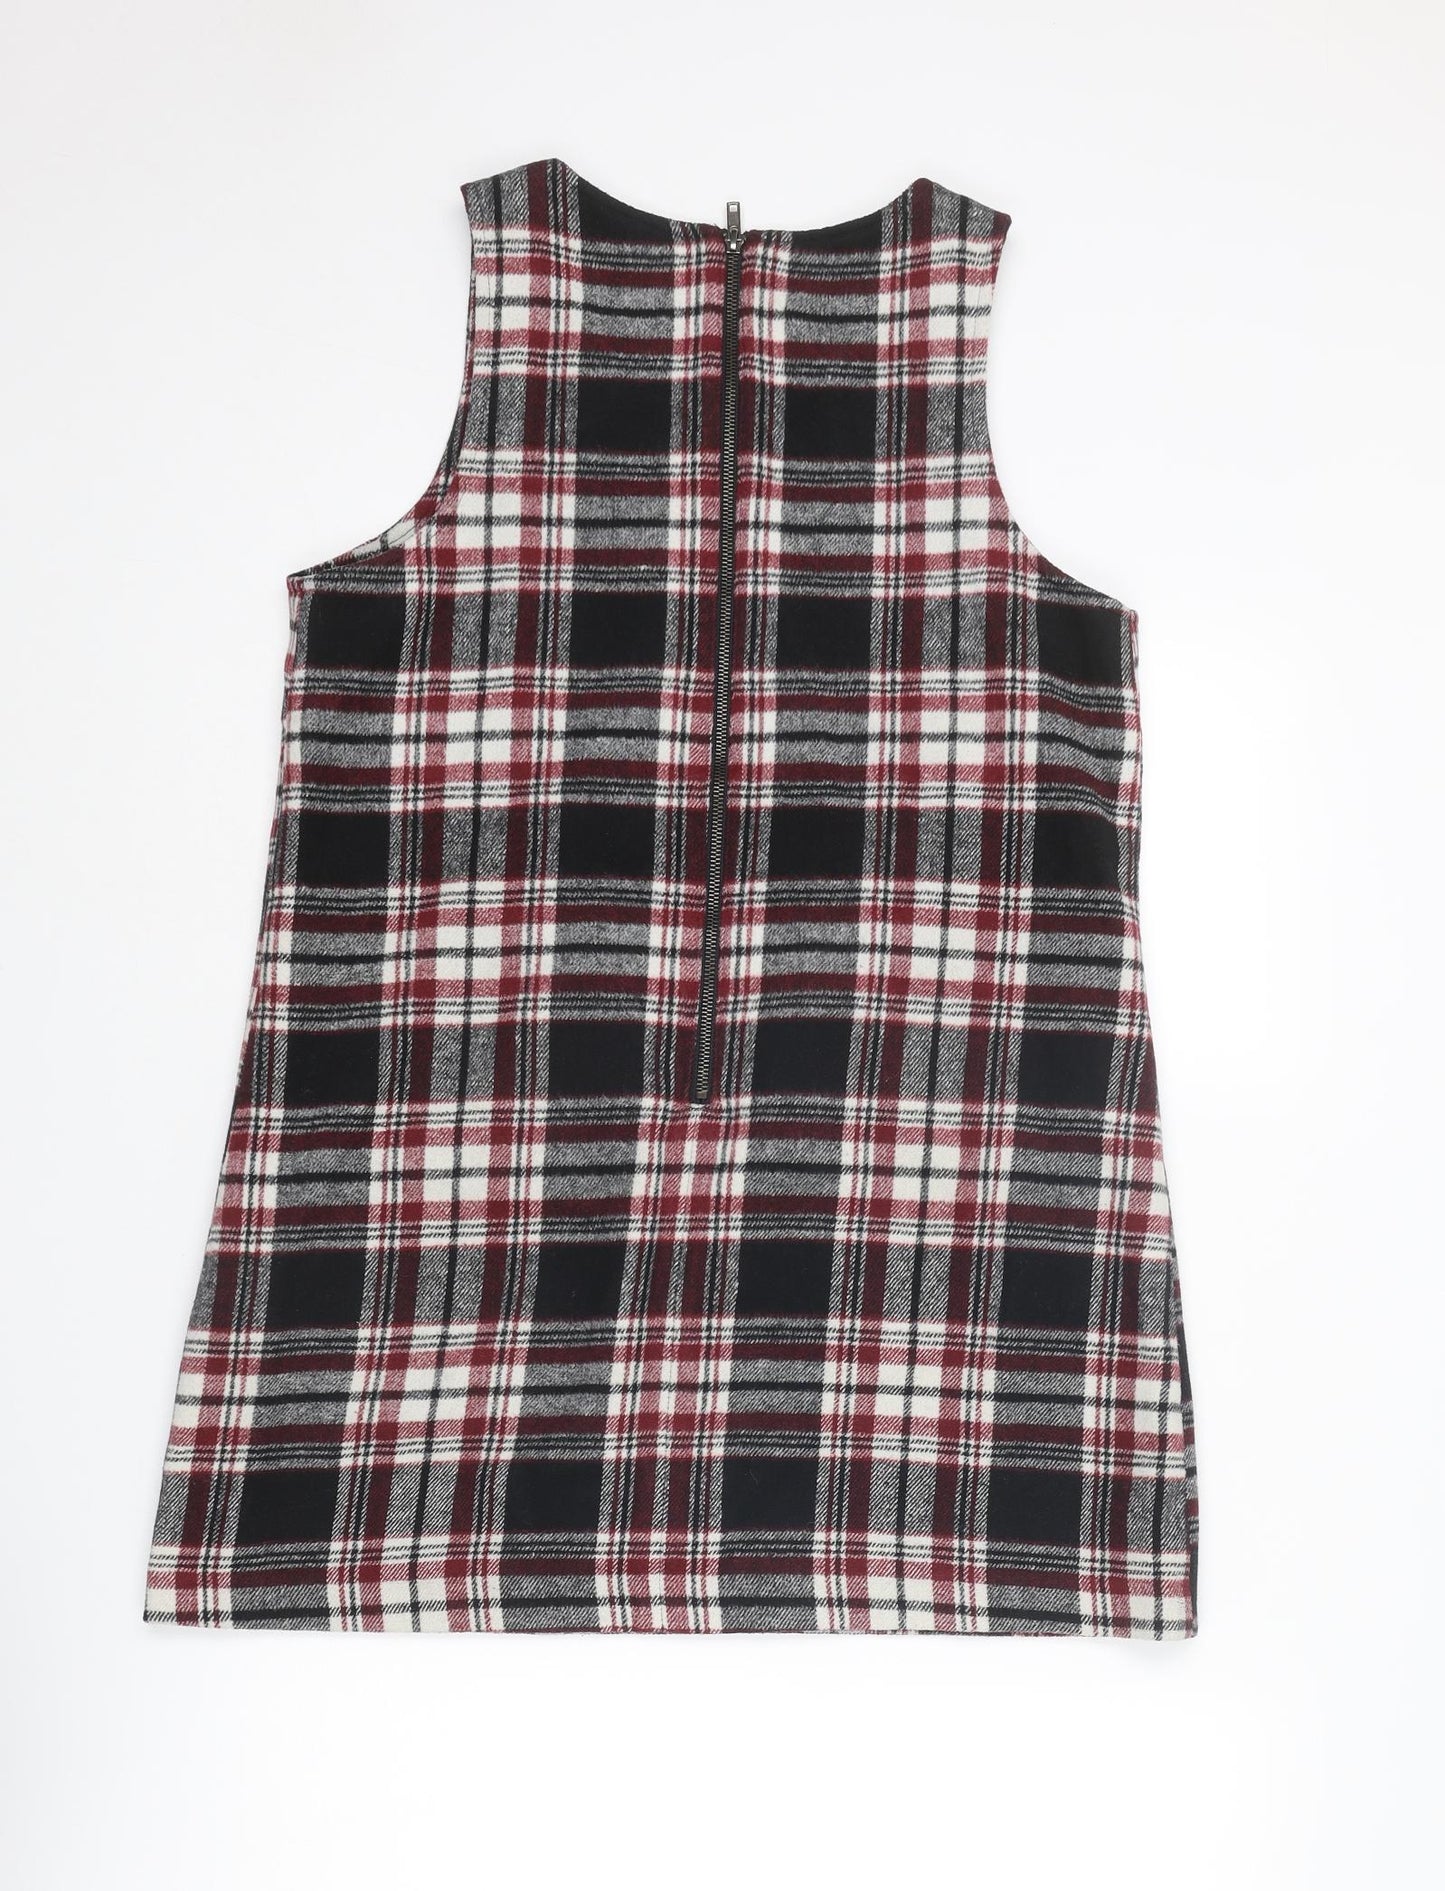 FOREVER 21 Womens Multicoloured Plaid Acrylic Pinafore/Dungaree Dress Size L Round Neck Zip